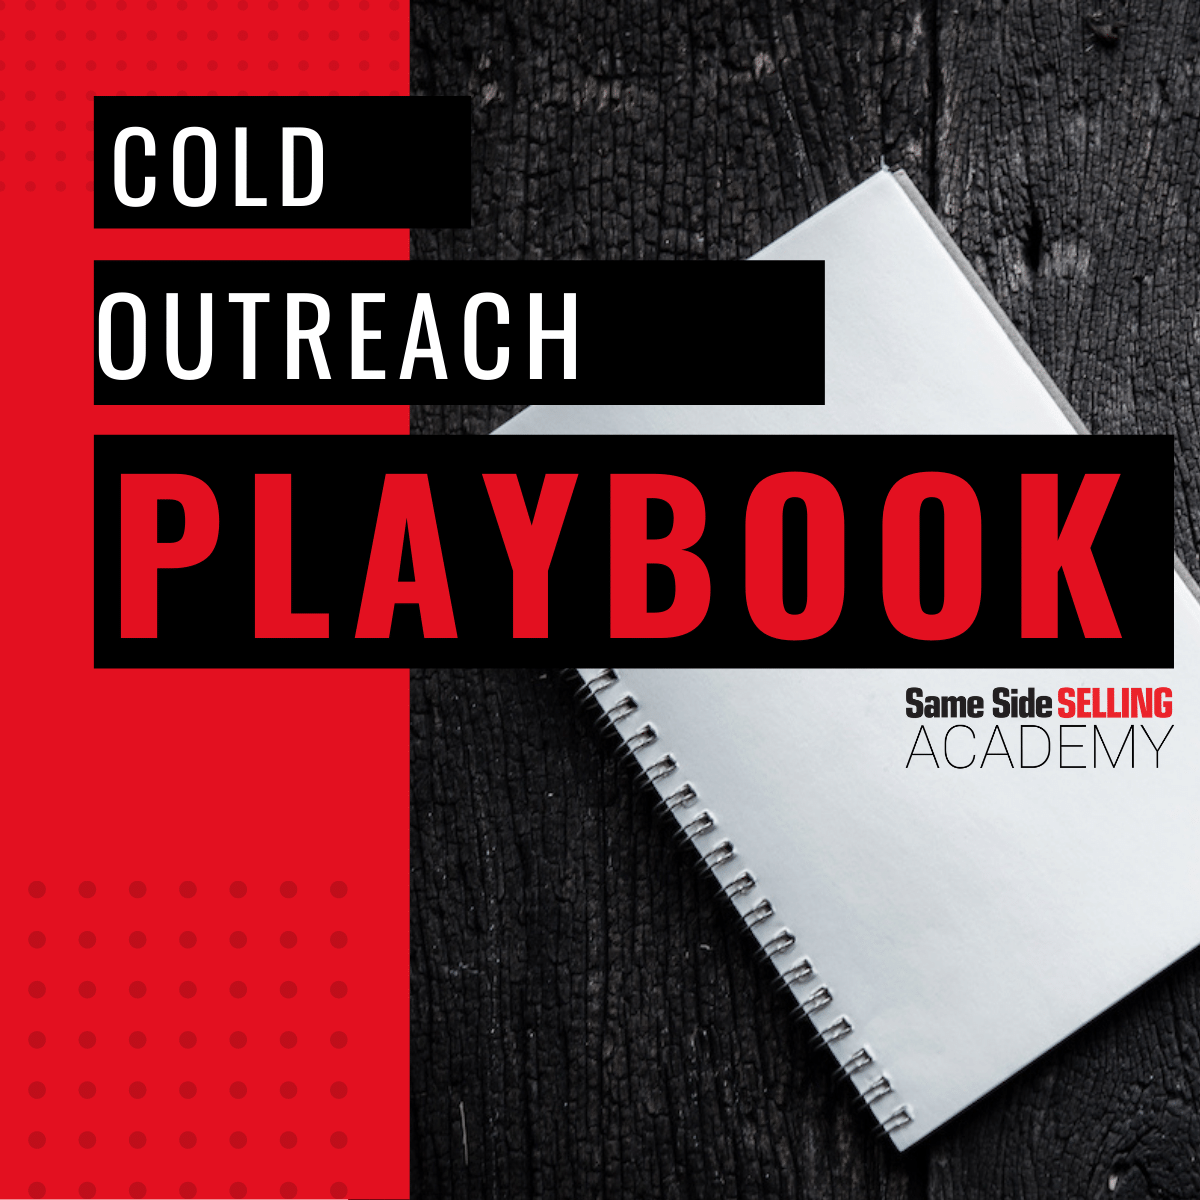 Cold Outreach Playbook